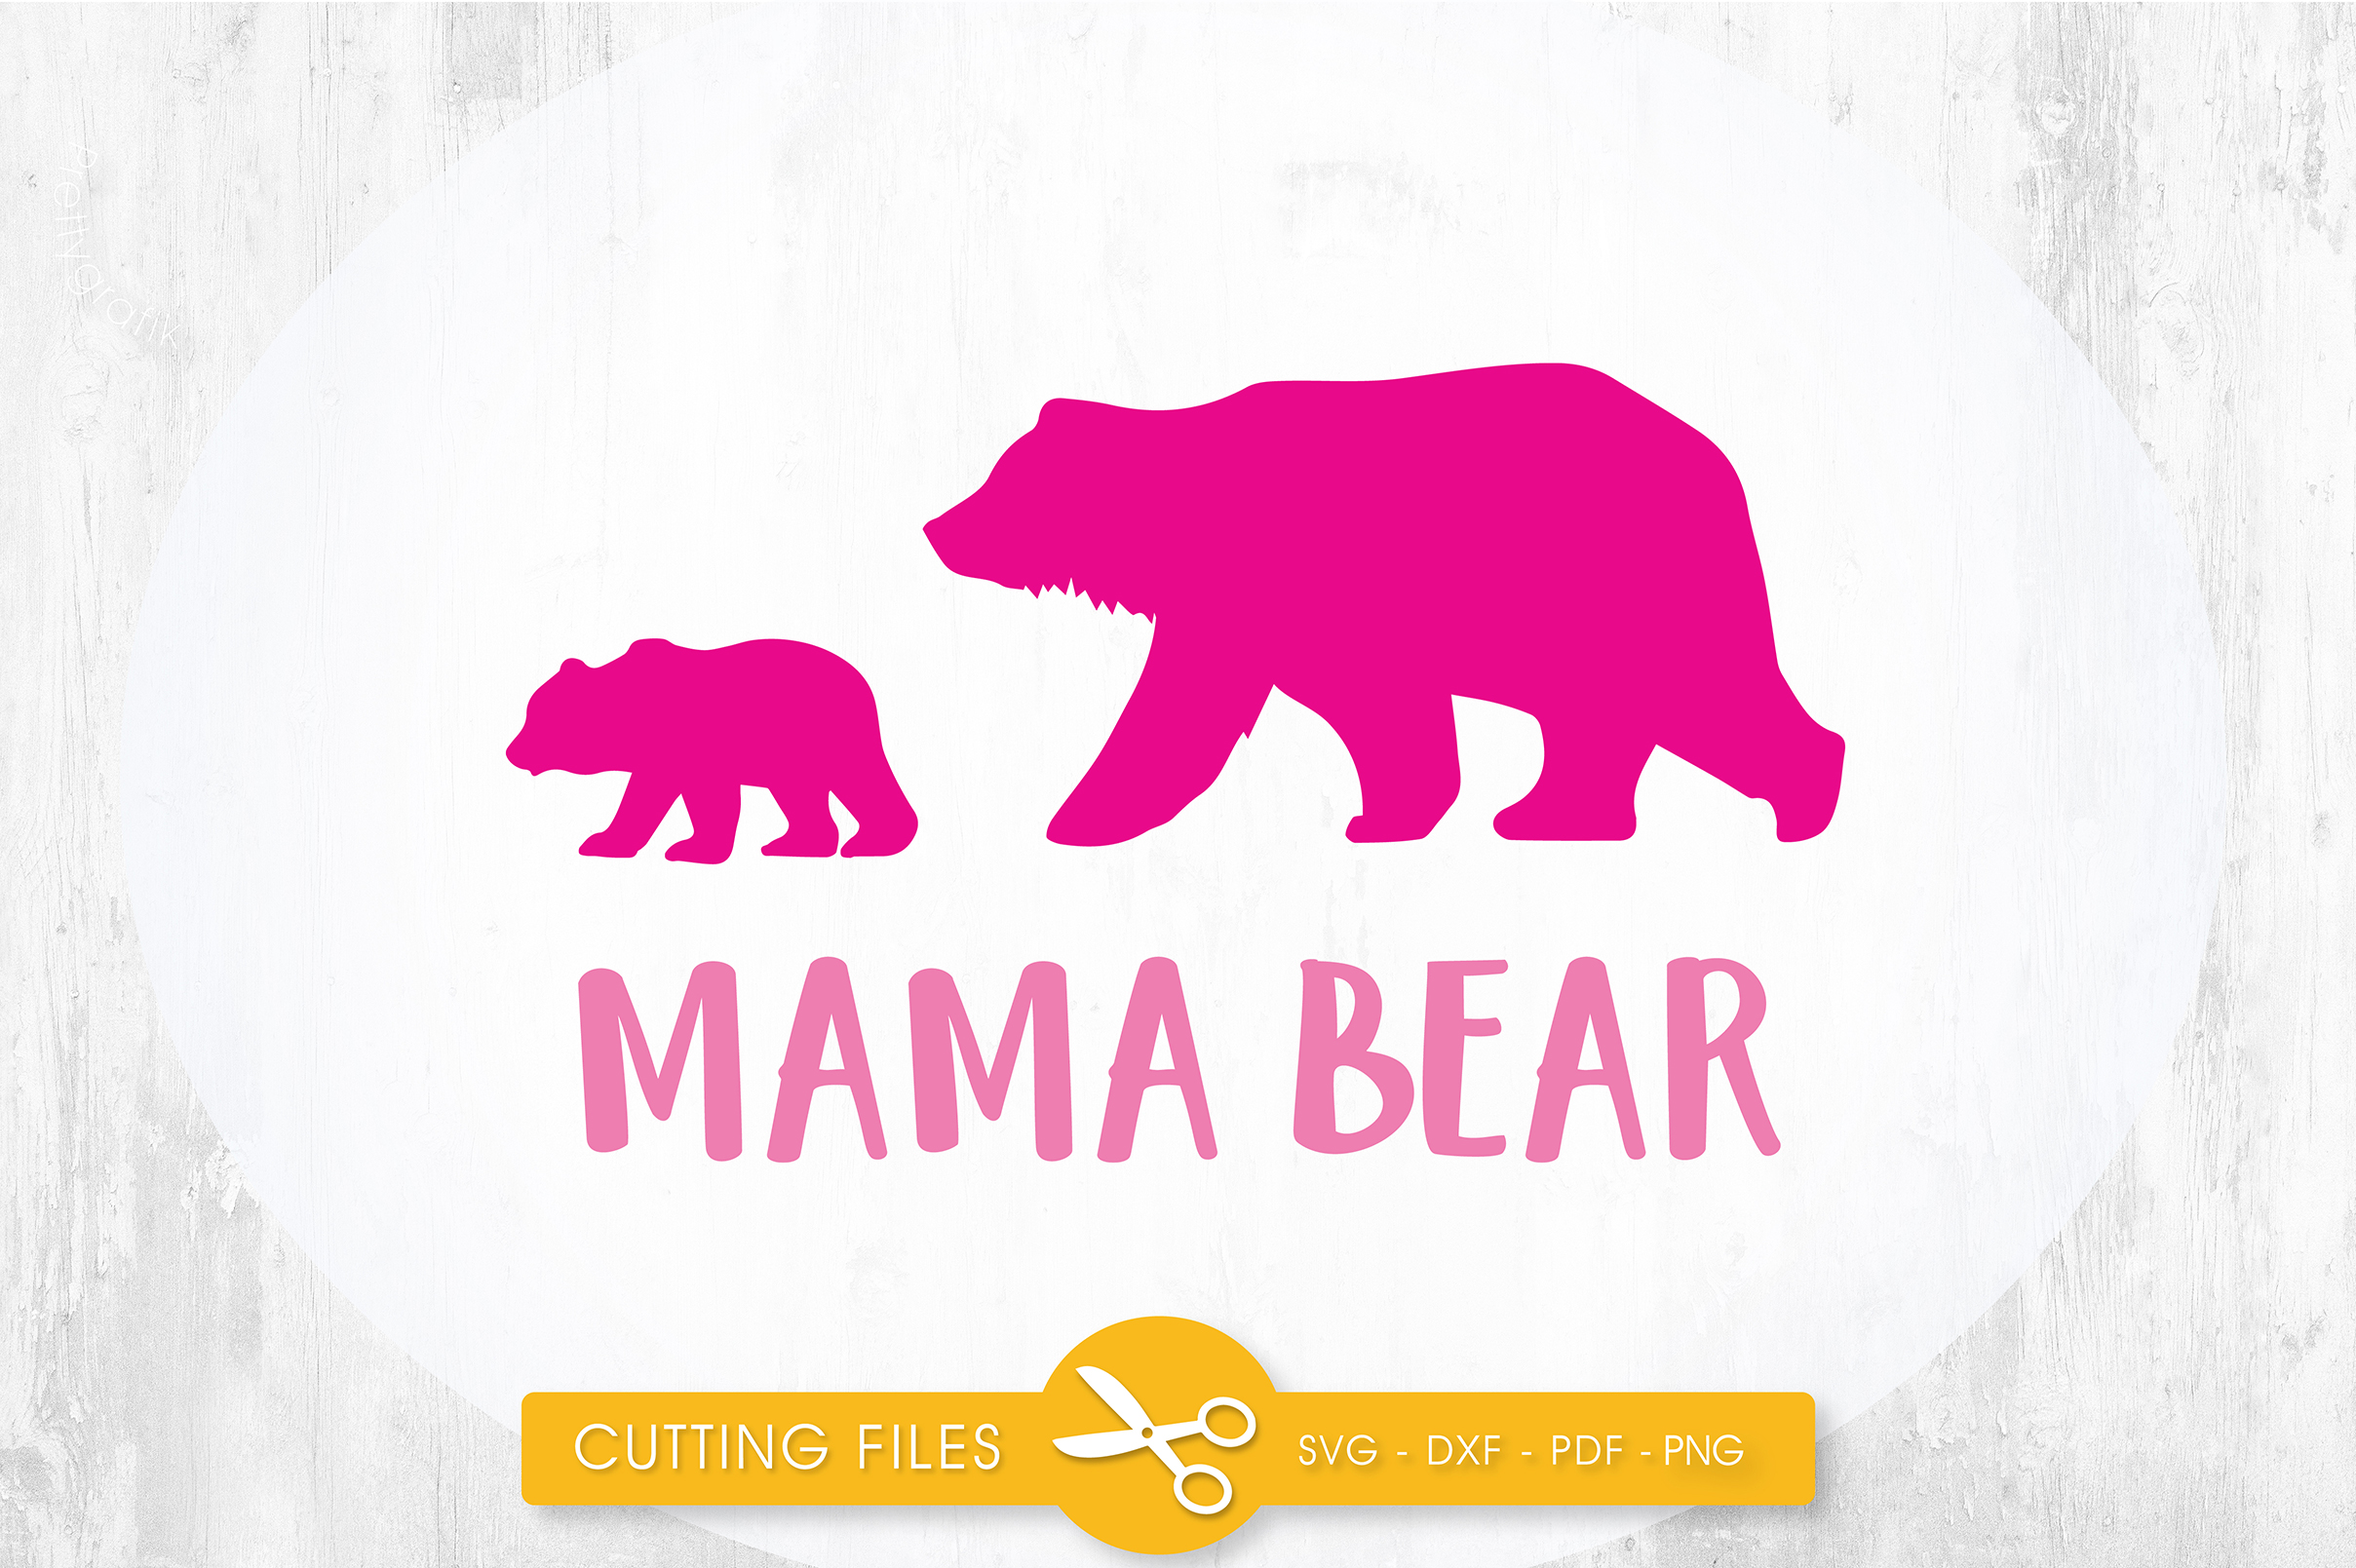 Download mama-bear cutting files svg, dxf, pdf, eps included - cut files for cricut and silhouette ...